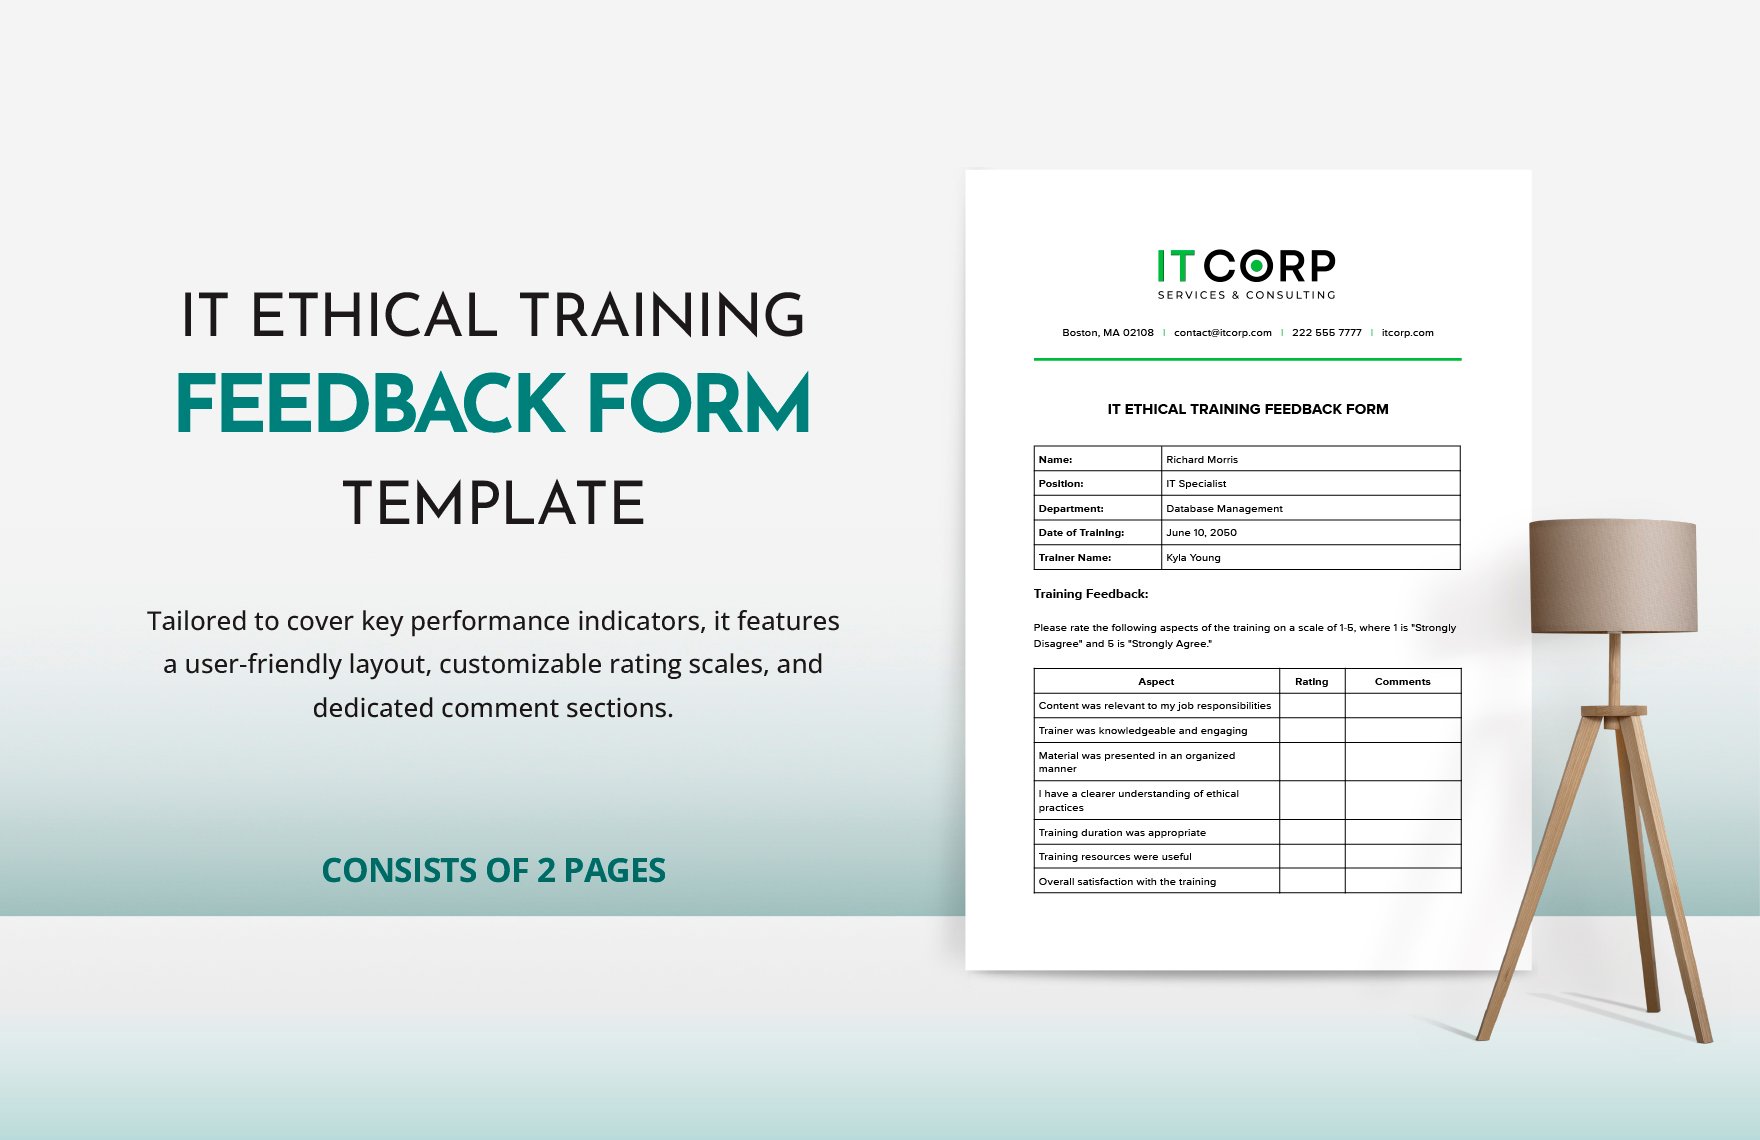 IT Ethical Training Feedback Form Template